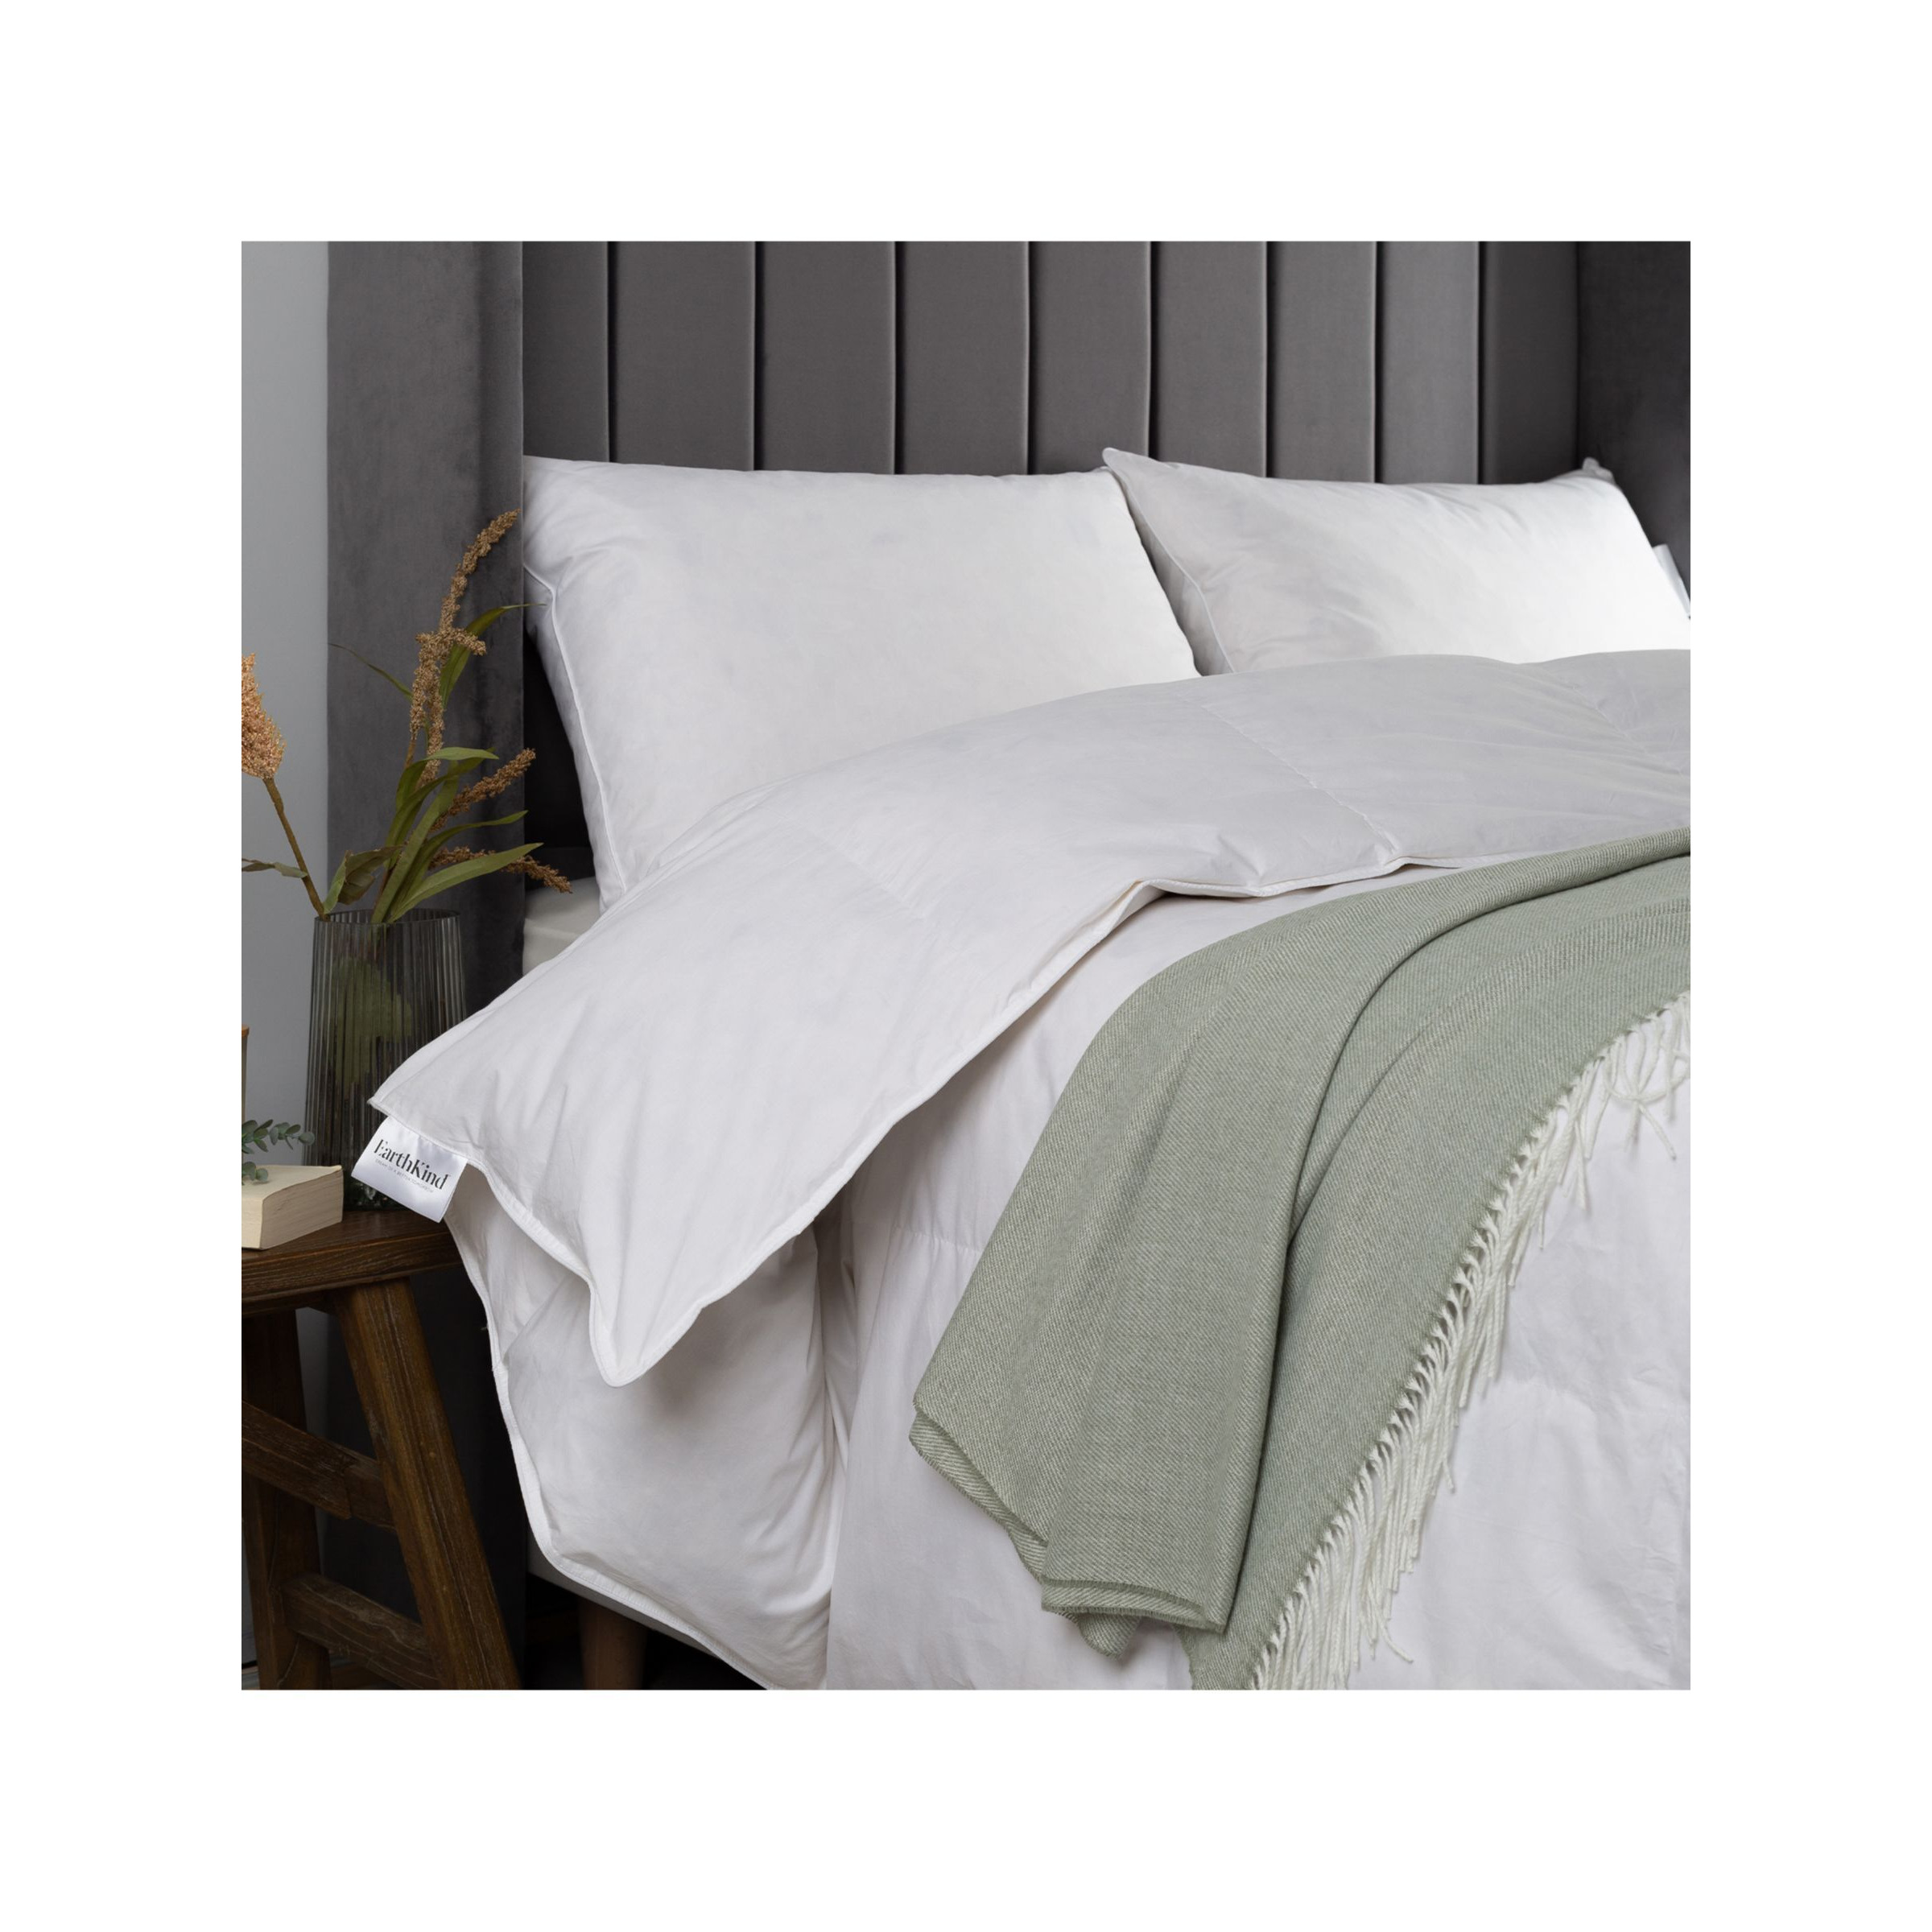 EarthKind™ Recycled Feather & Down Duvet, 10.5 Tog - image 1